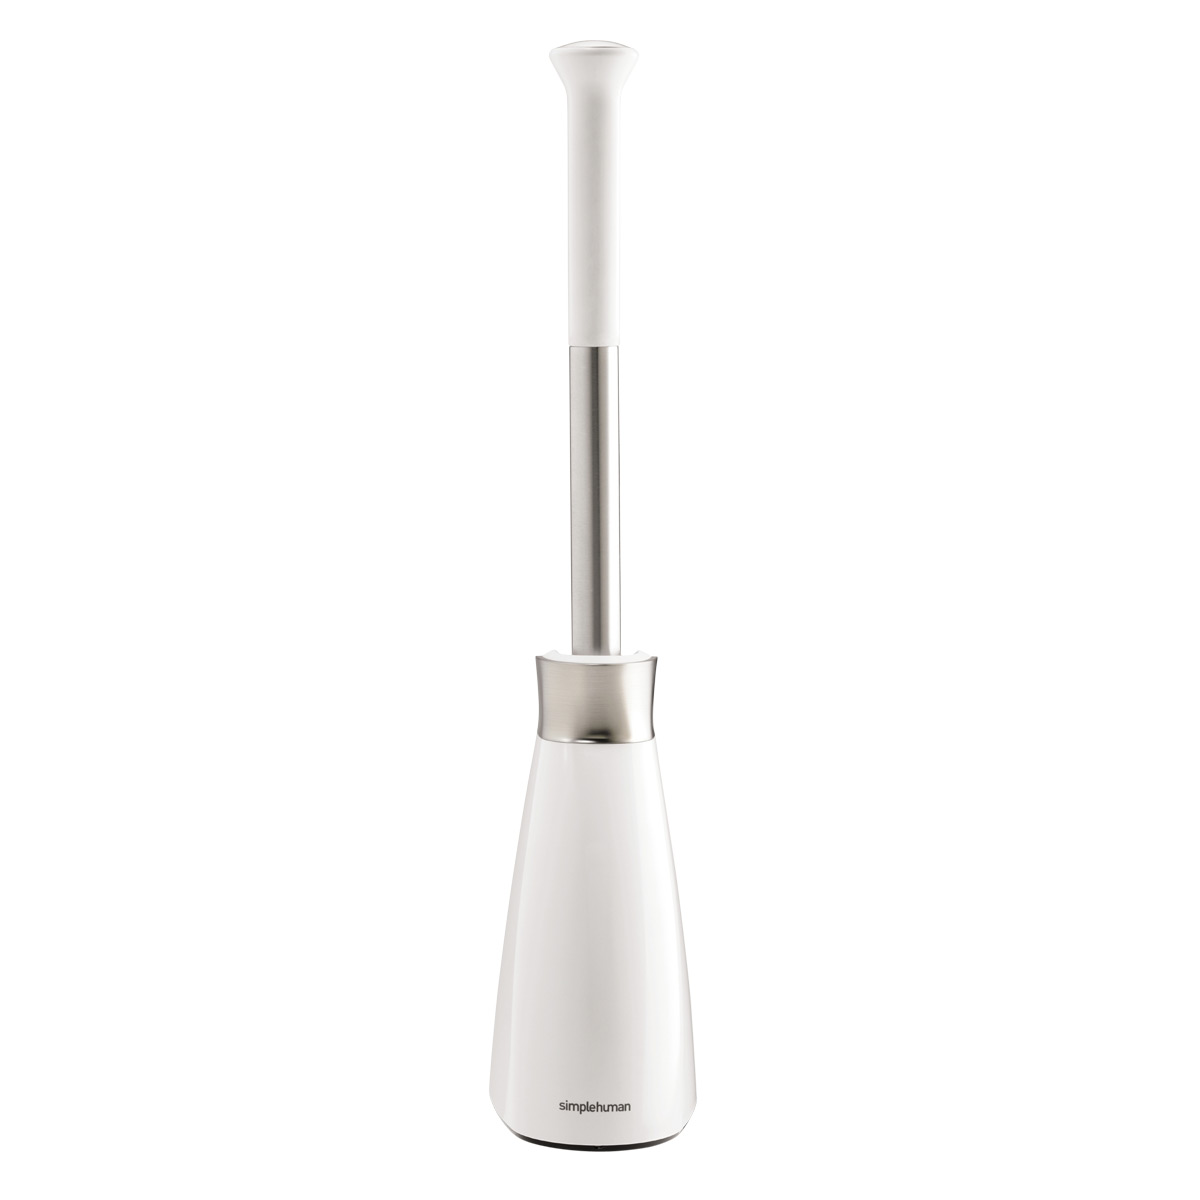 https://www.containerstore.com/catalogimages/378528/10061723-Magnetic-Toilet-Brush-VEN1.jpg